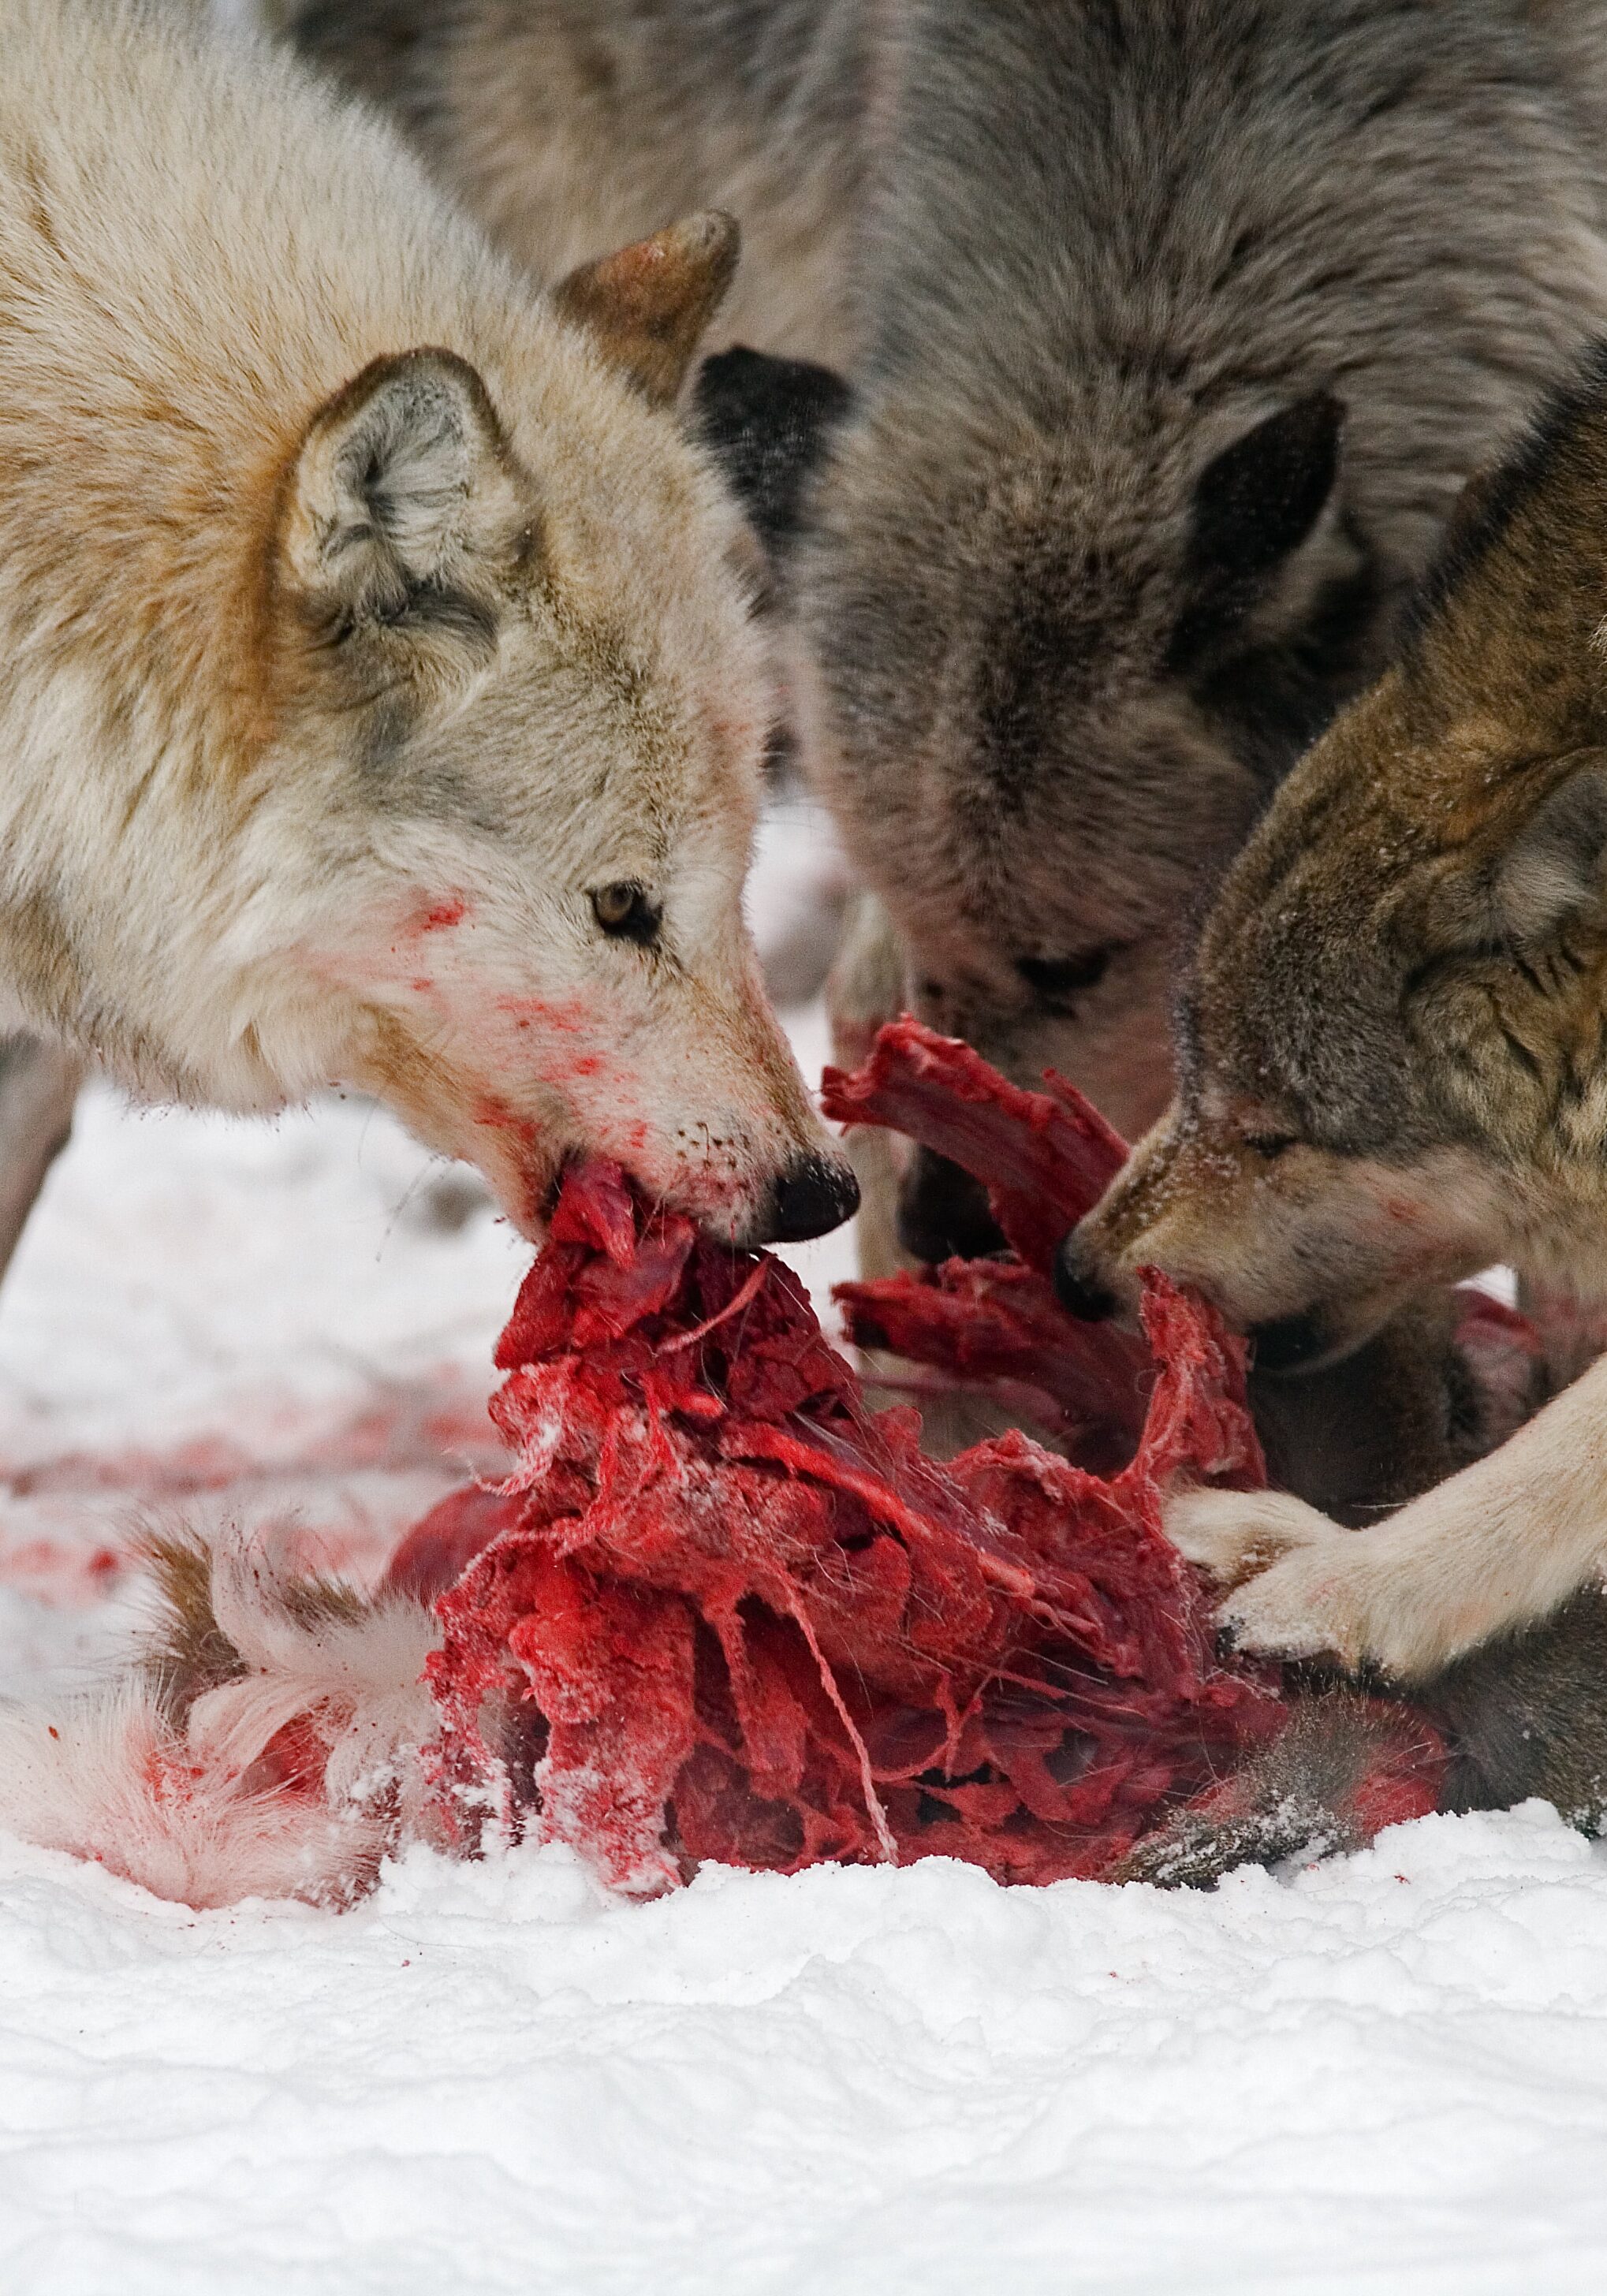 Gray wolves hunting, eating and resting.